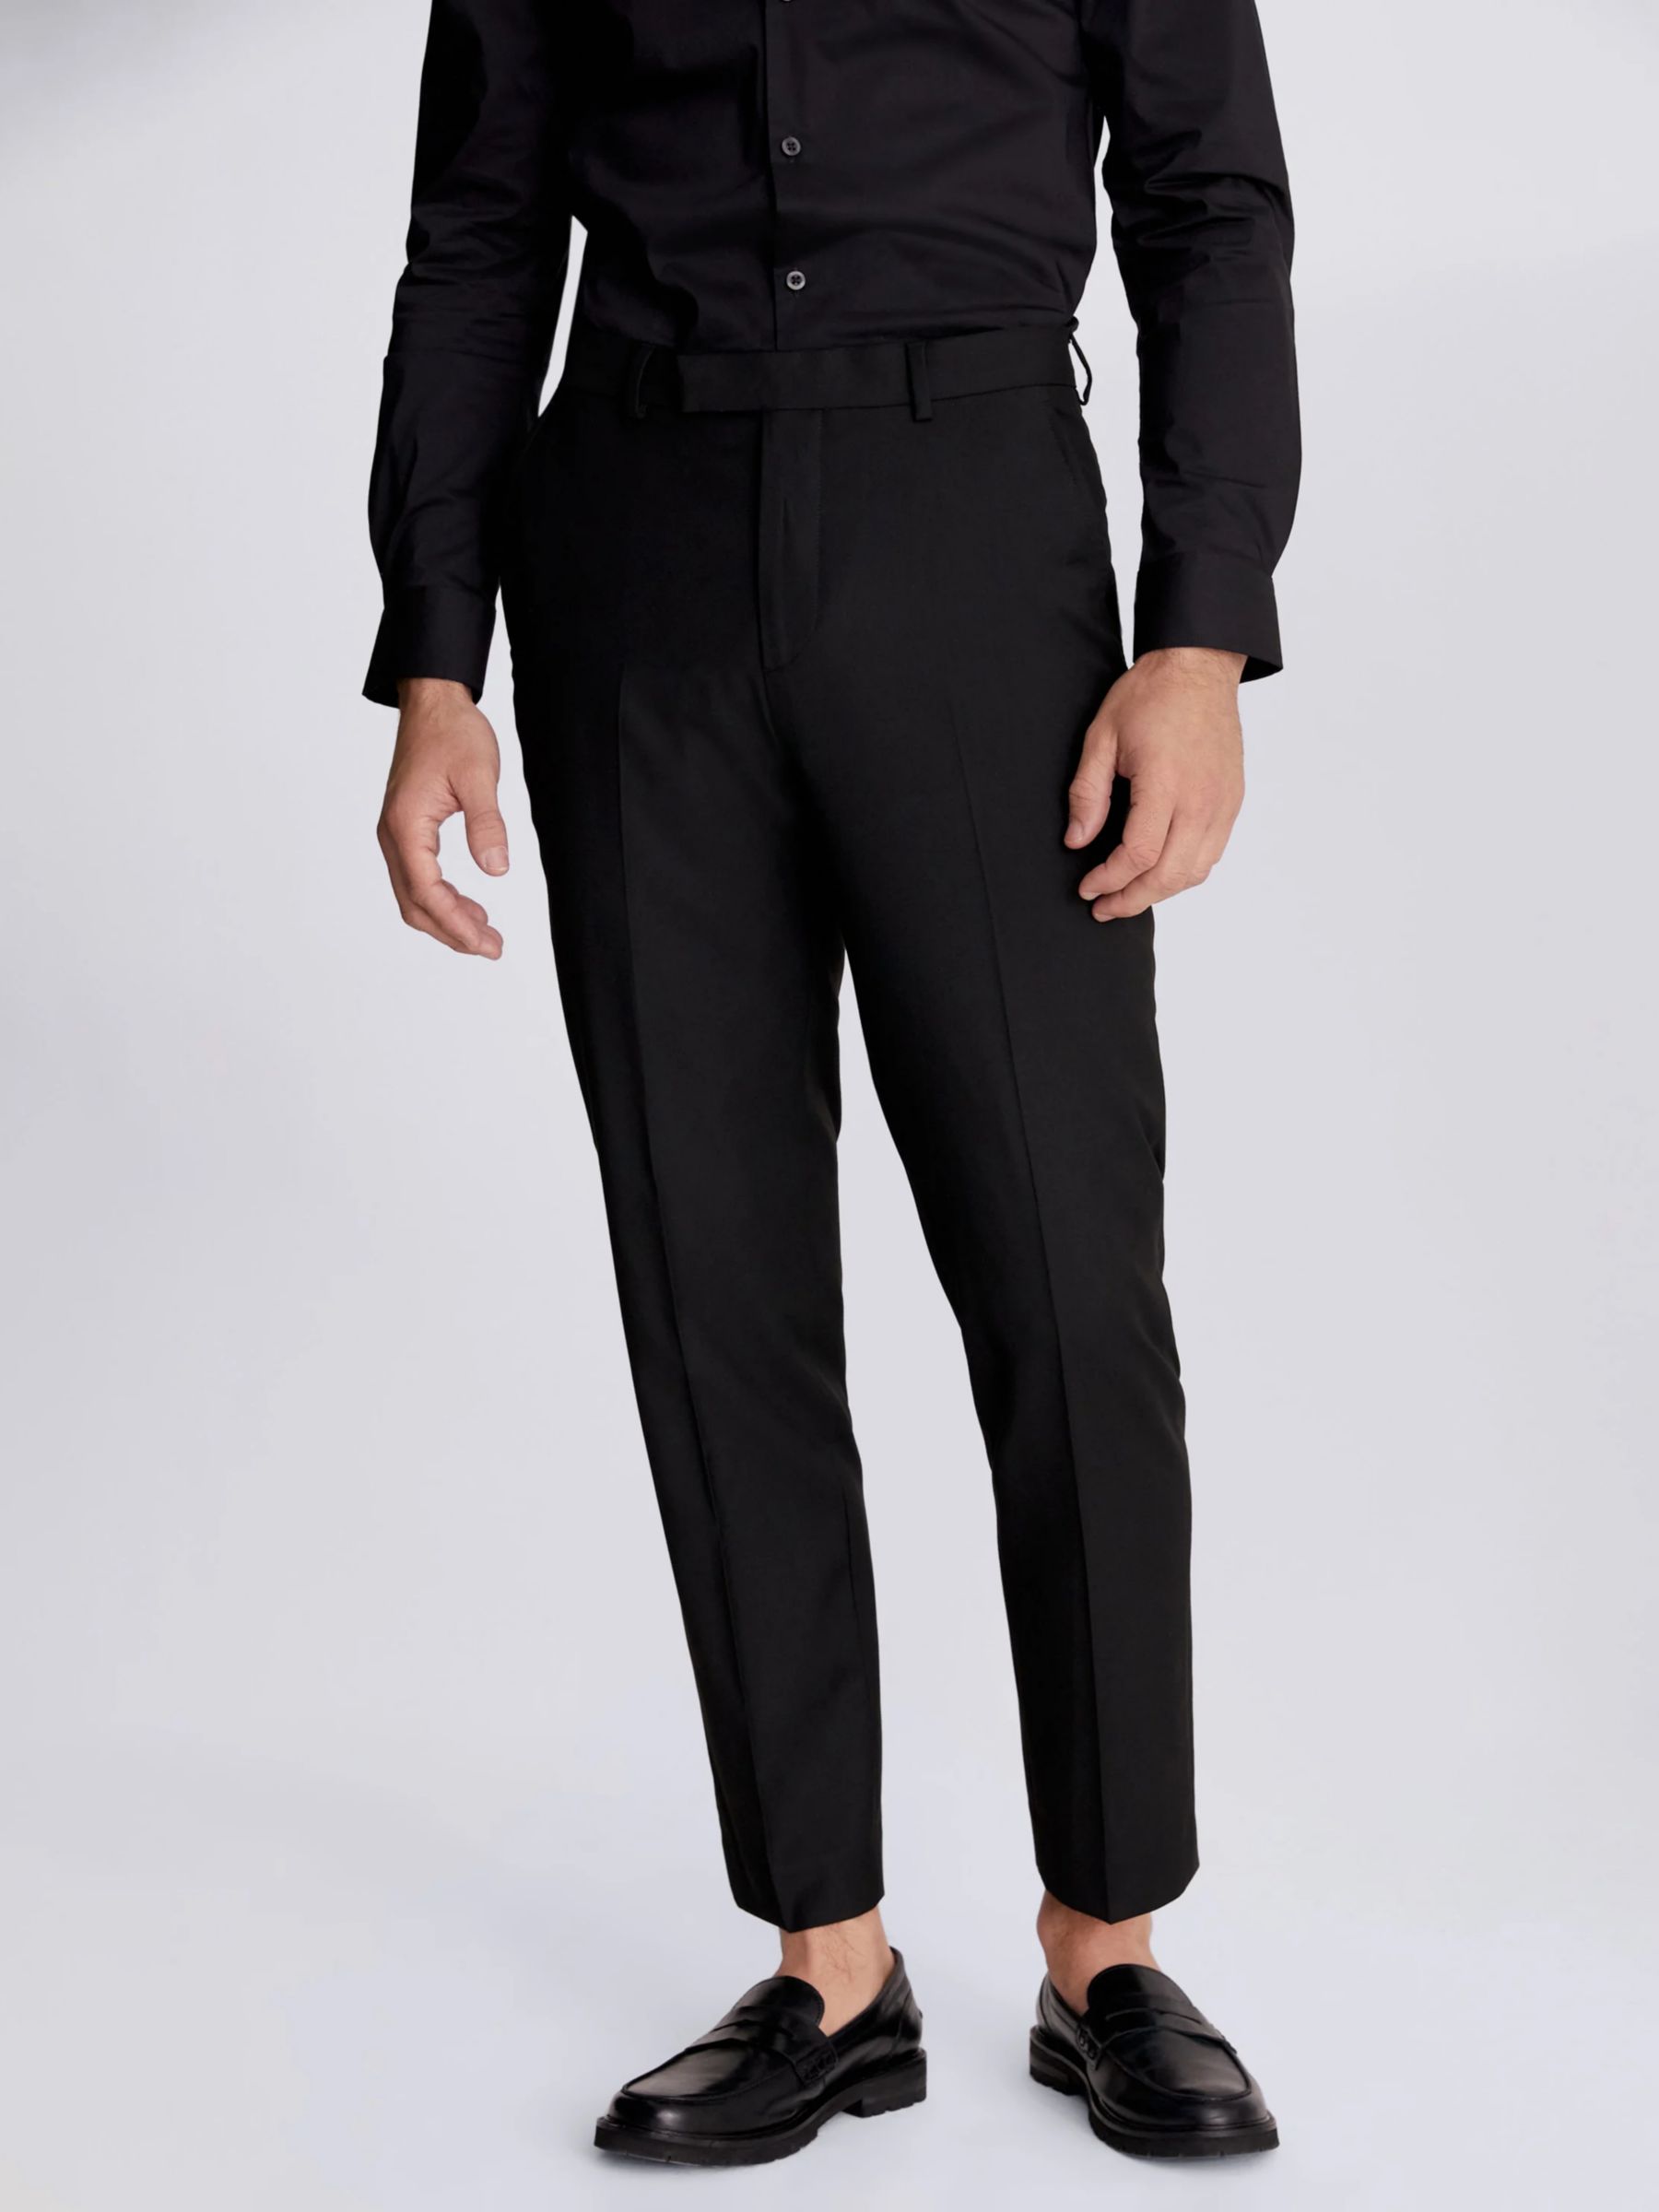 Moss Regular Fit Stretch Suit Trousers, Black, 28S